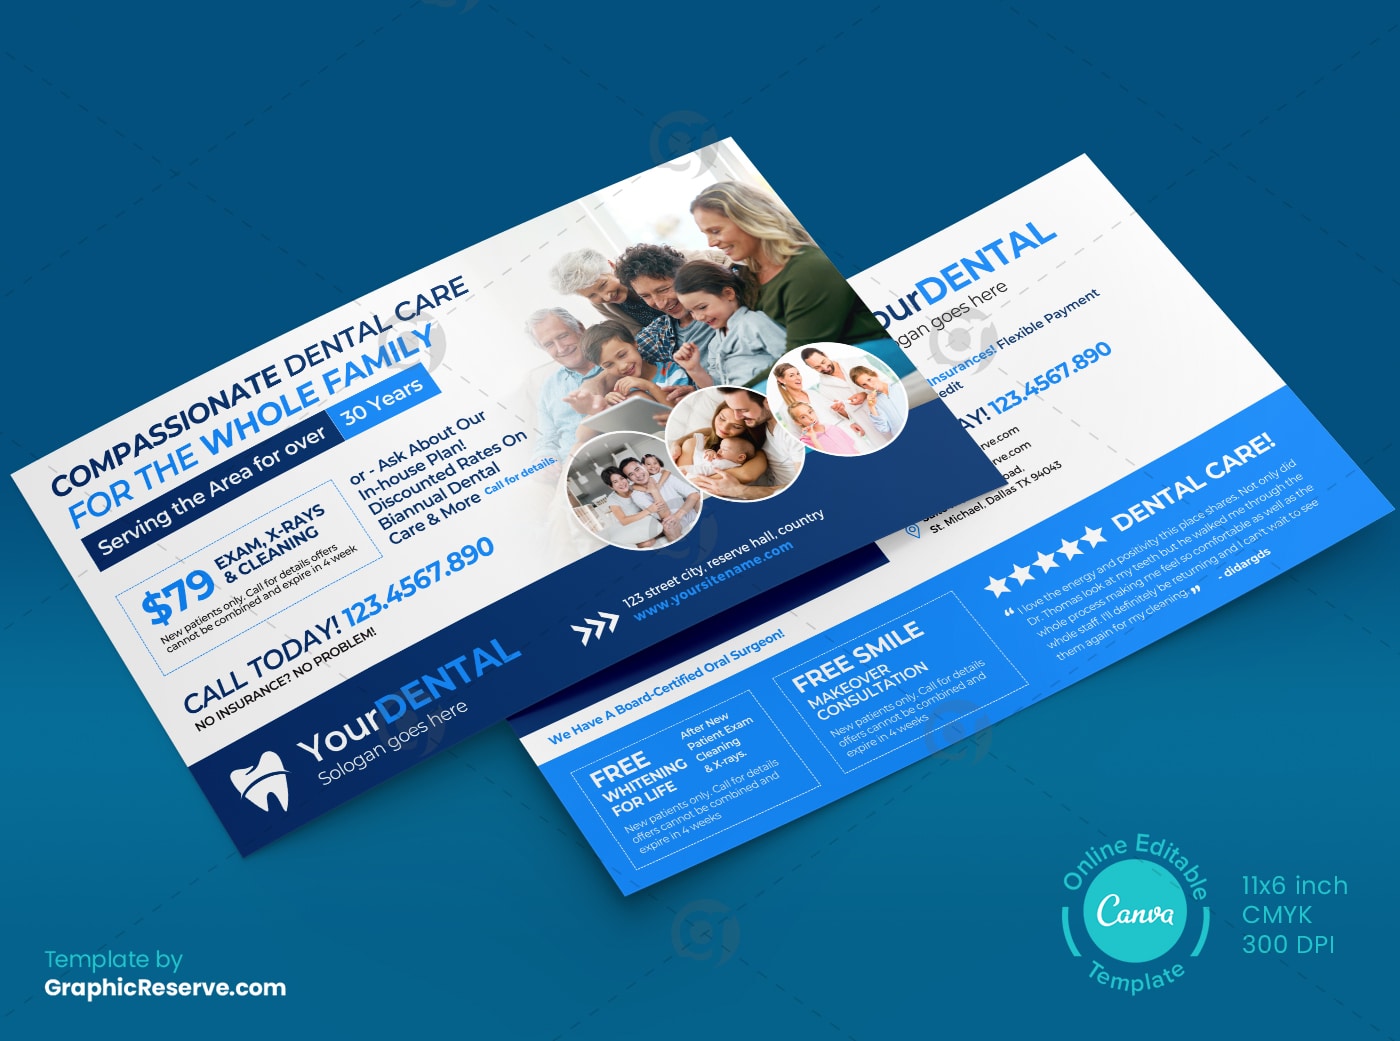 Dental Care Standard Postcard Template Graphic Reserve Preview image2